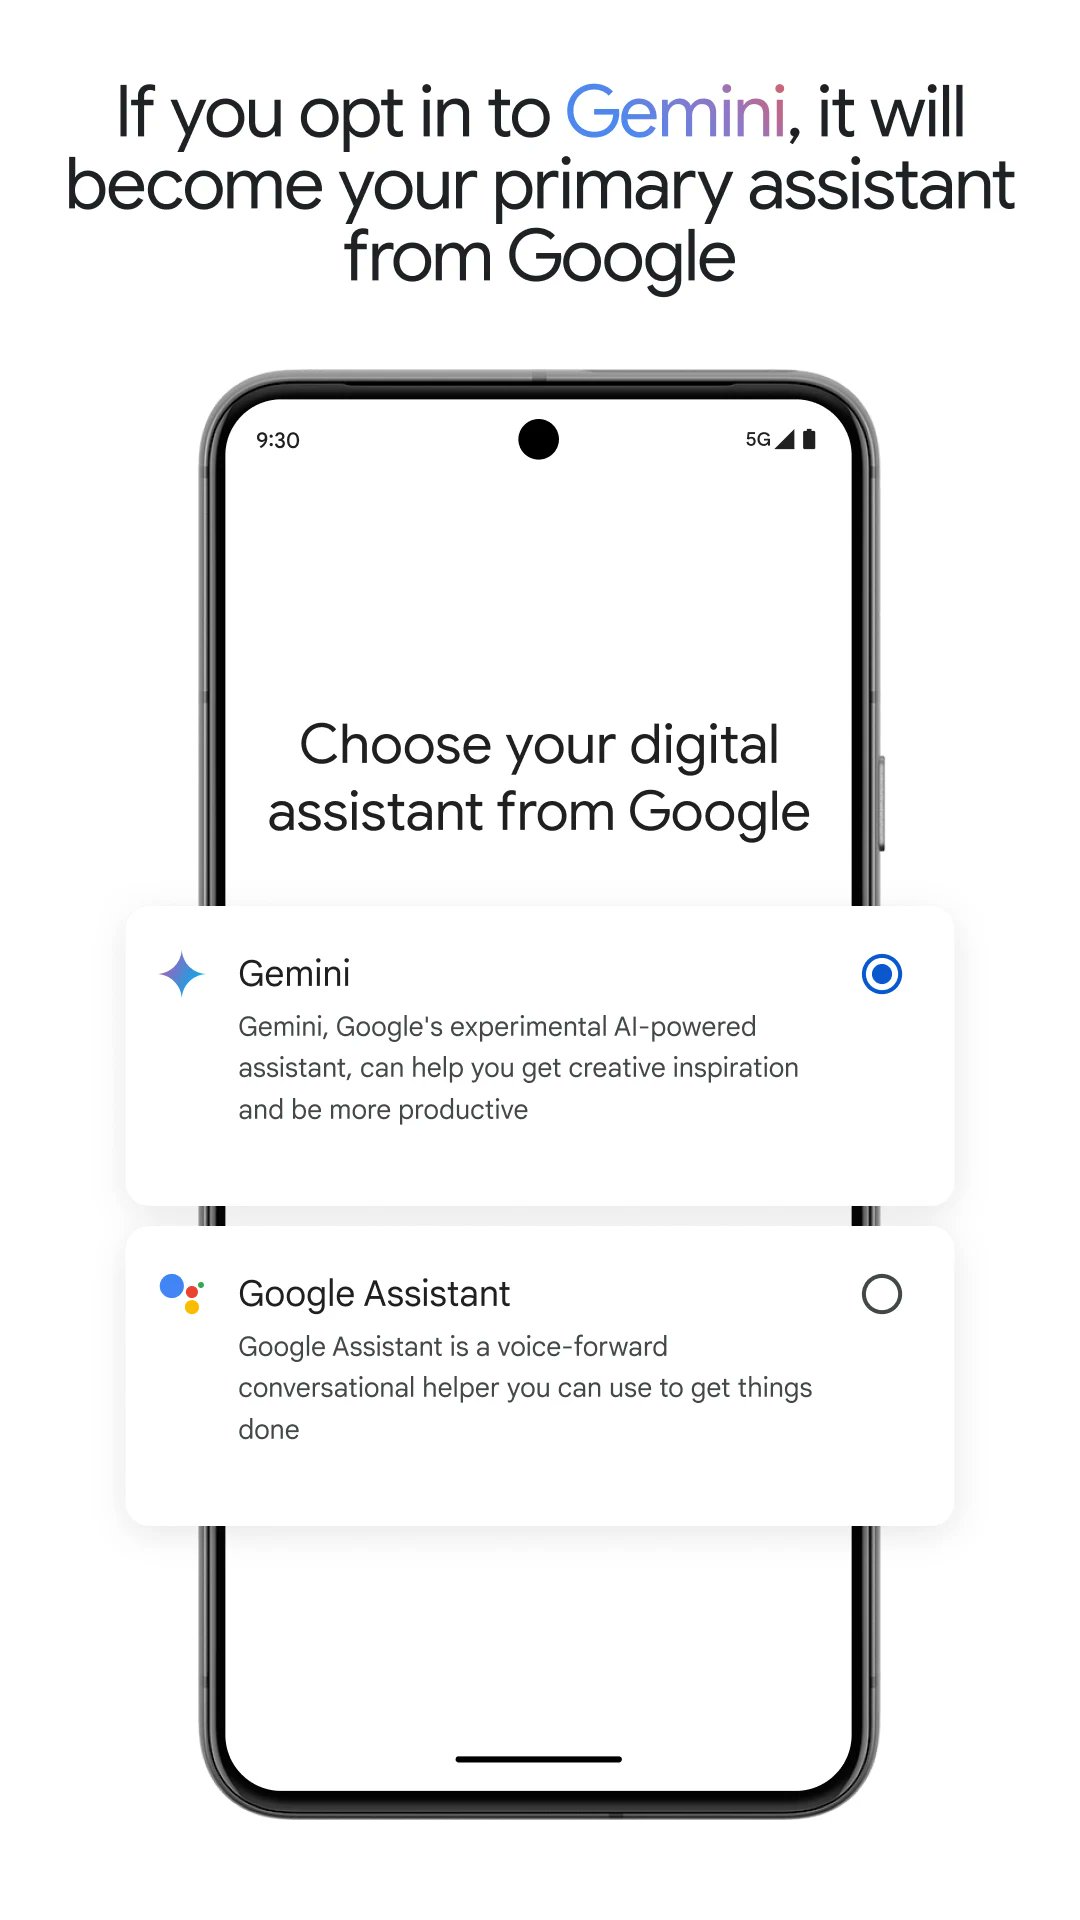 8 handy things to do with your new Google Assistant